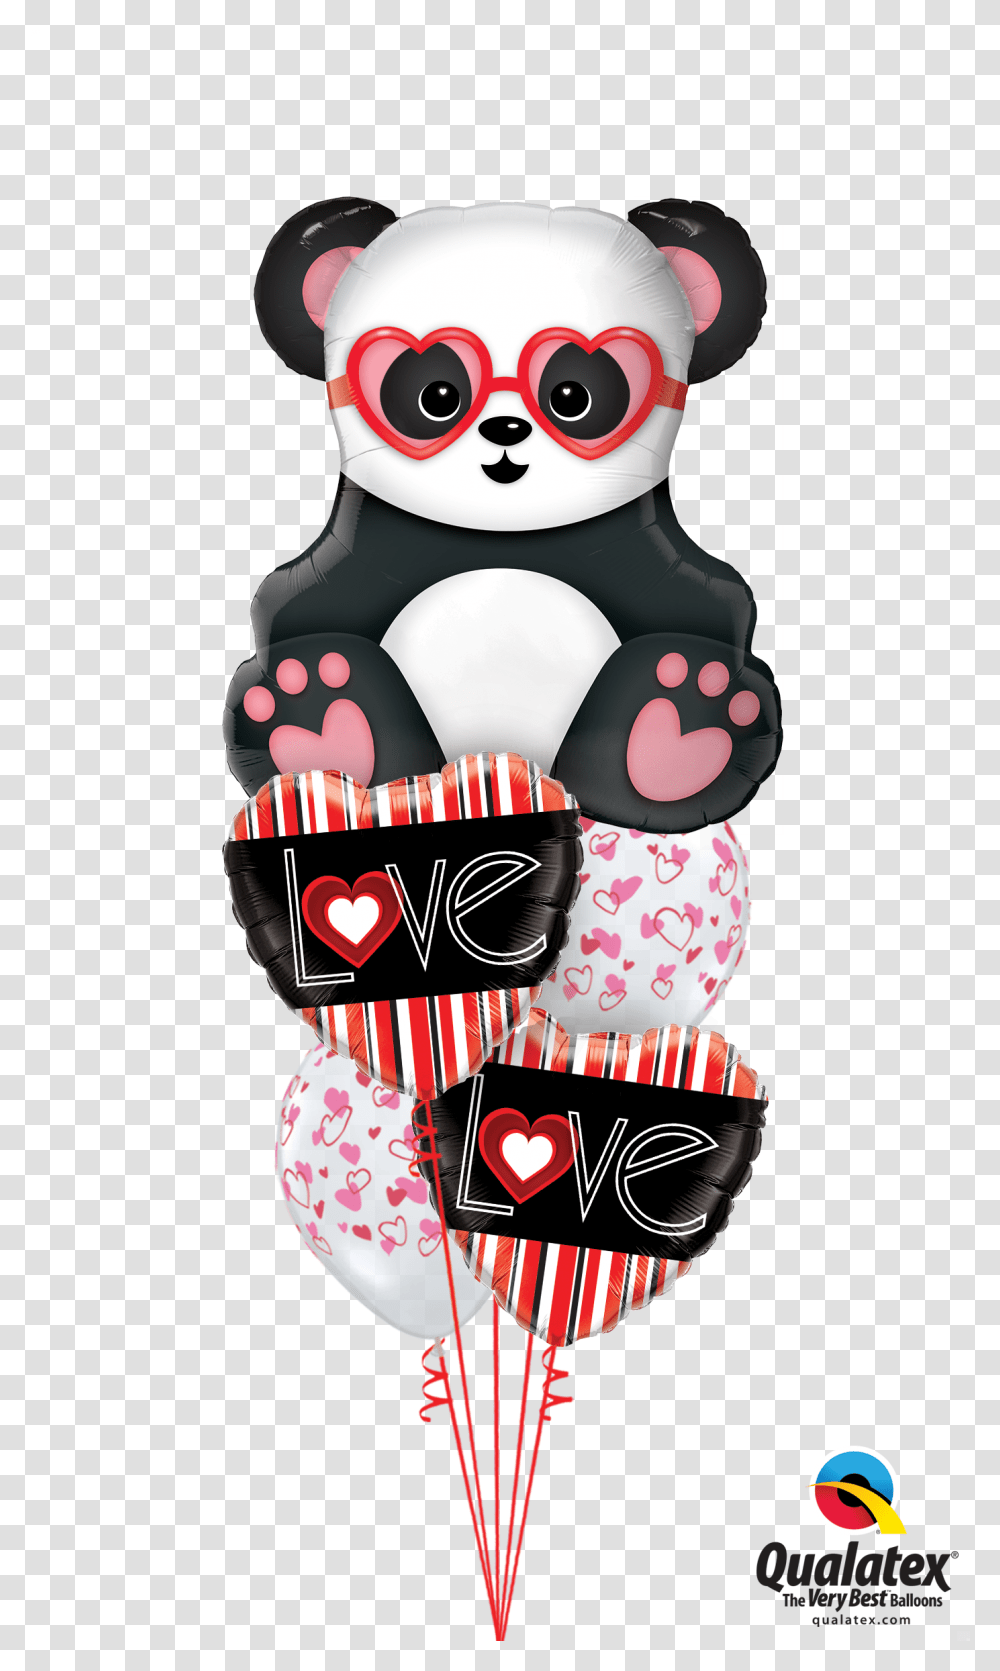 Love You Balloon Bouquet Panda Balloon, Apparel, Toy, Label Transparent Png